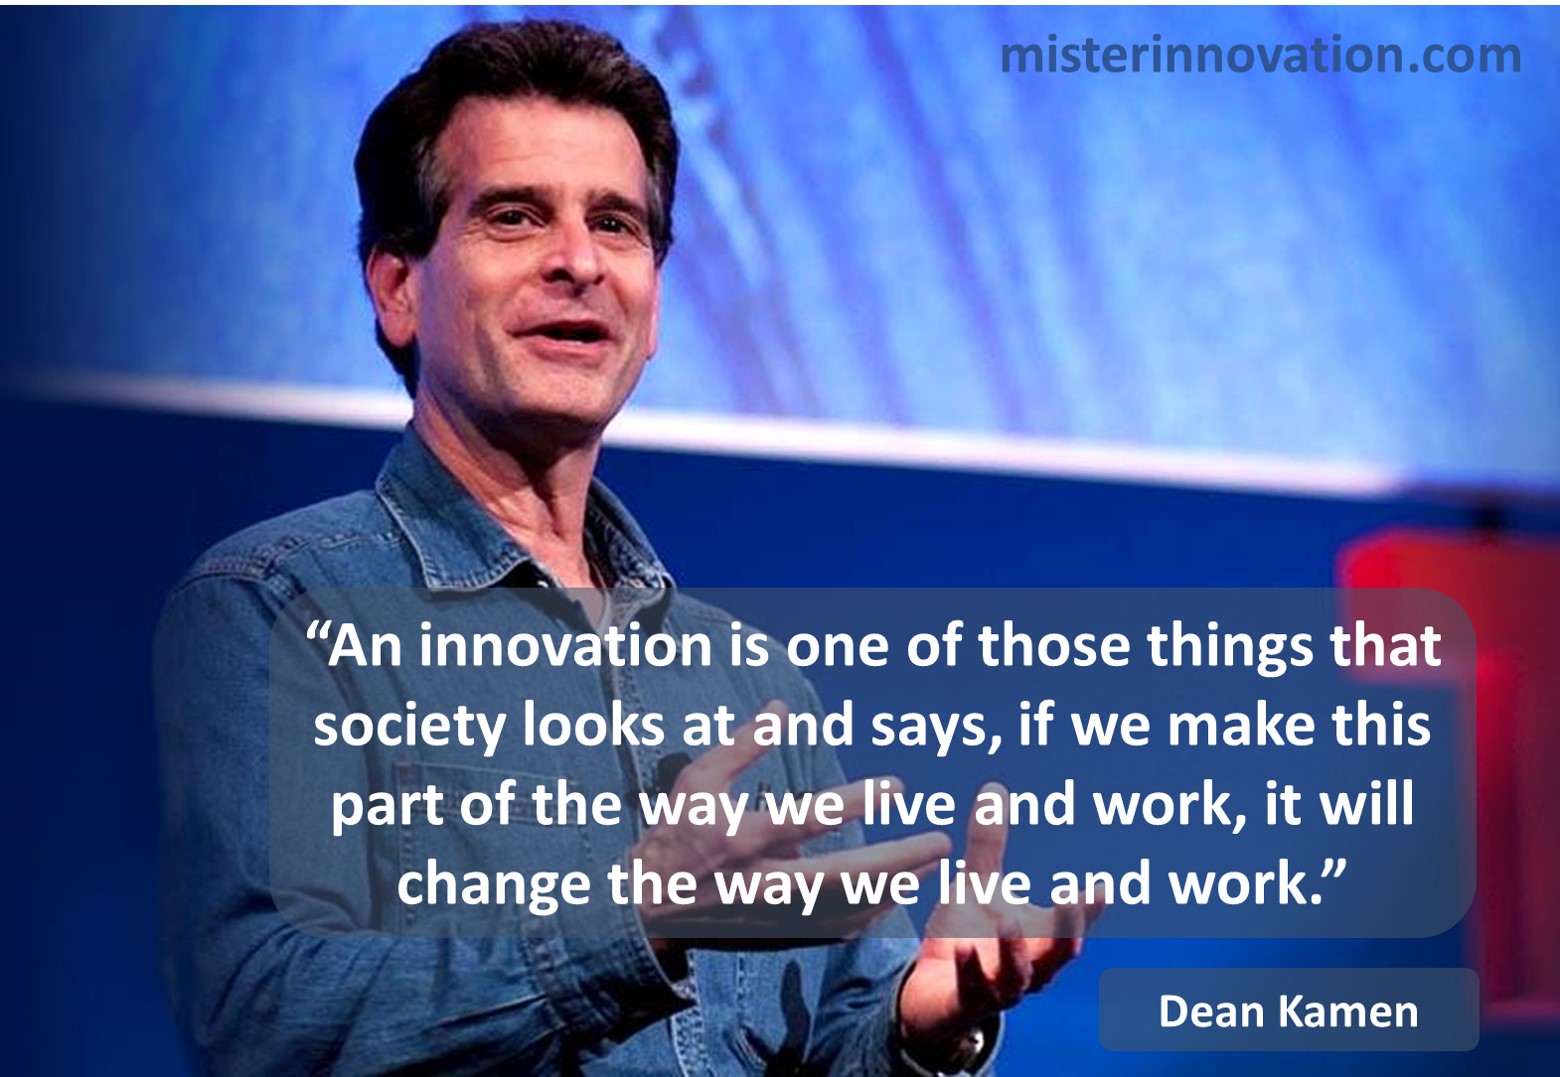 Dean Kamen Changing Society with Innovation